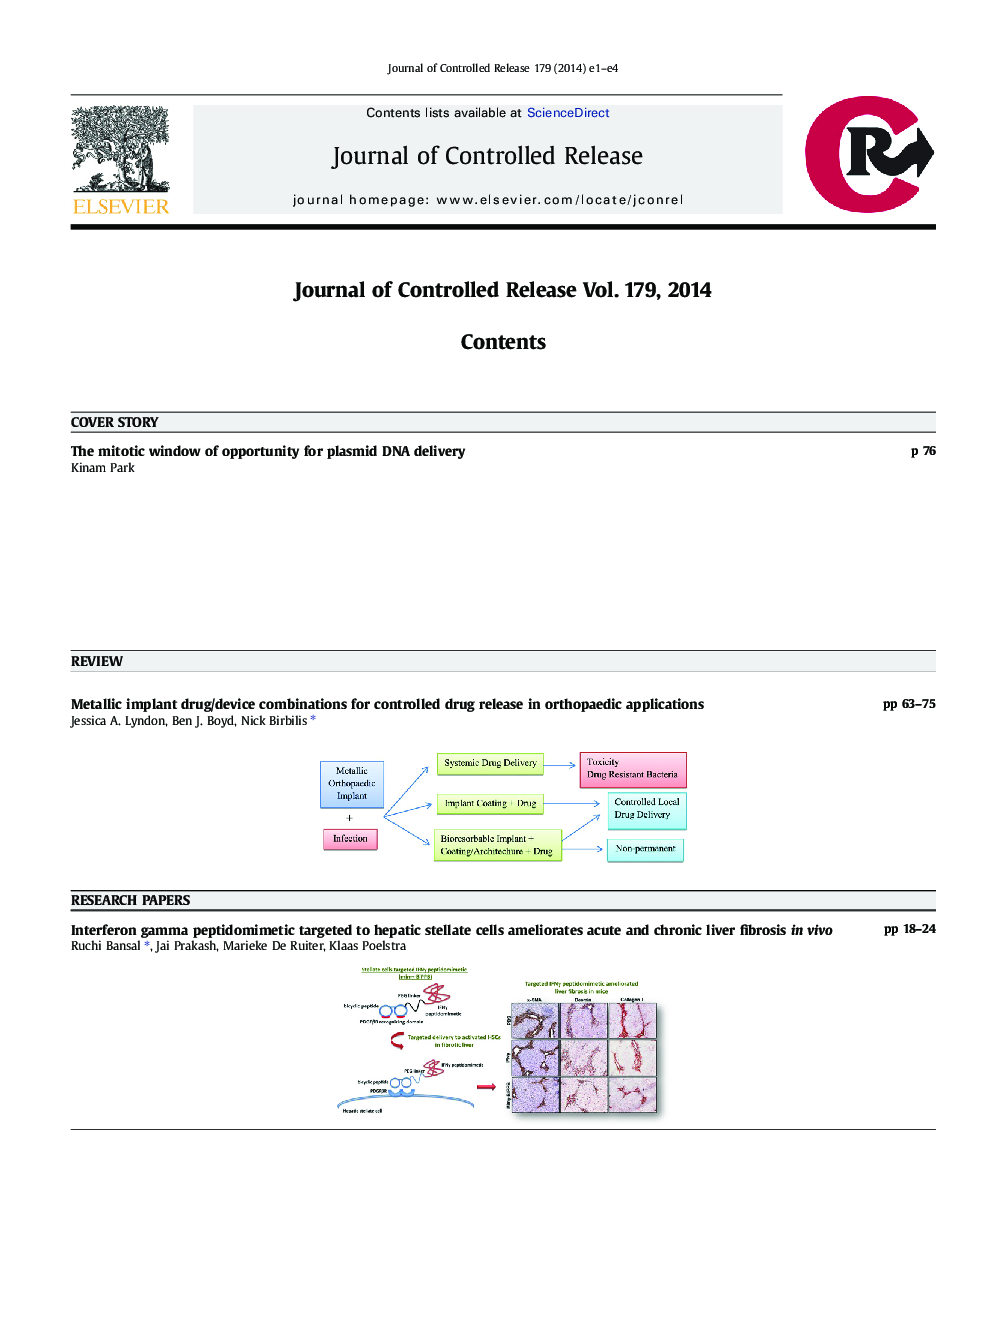 Graphical Abstracts Contents Listing